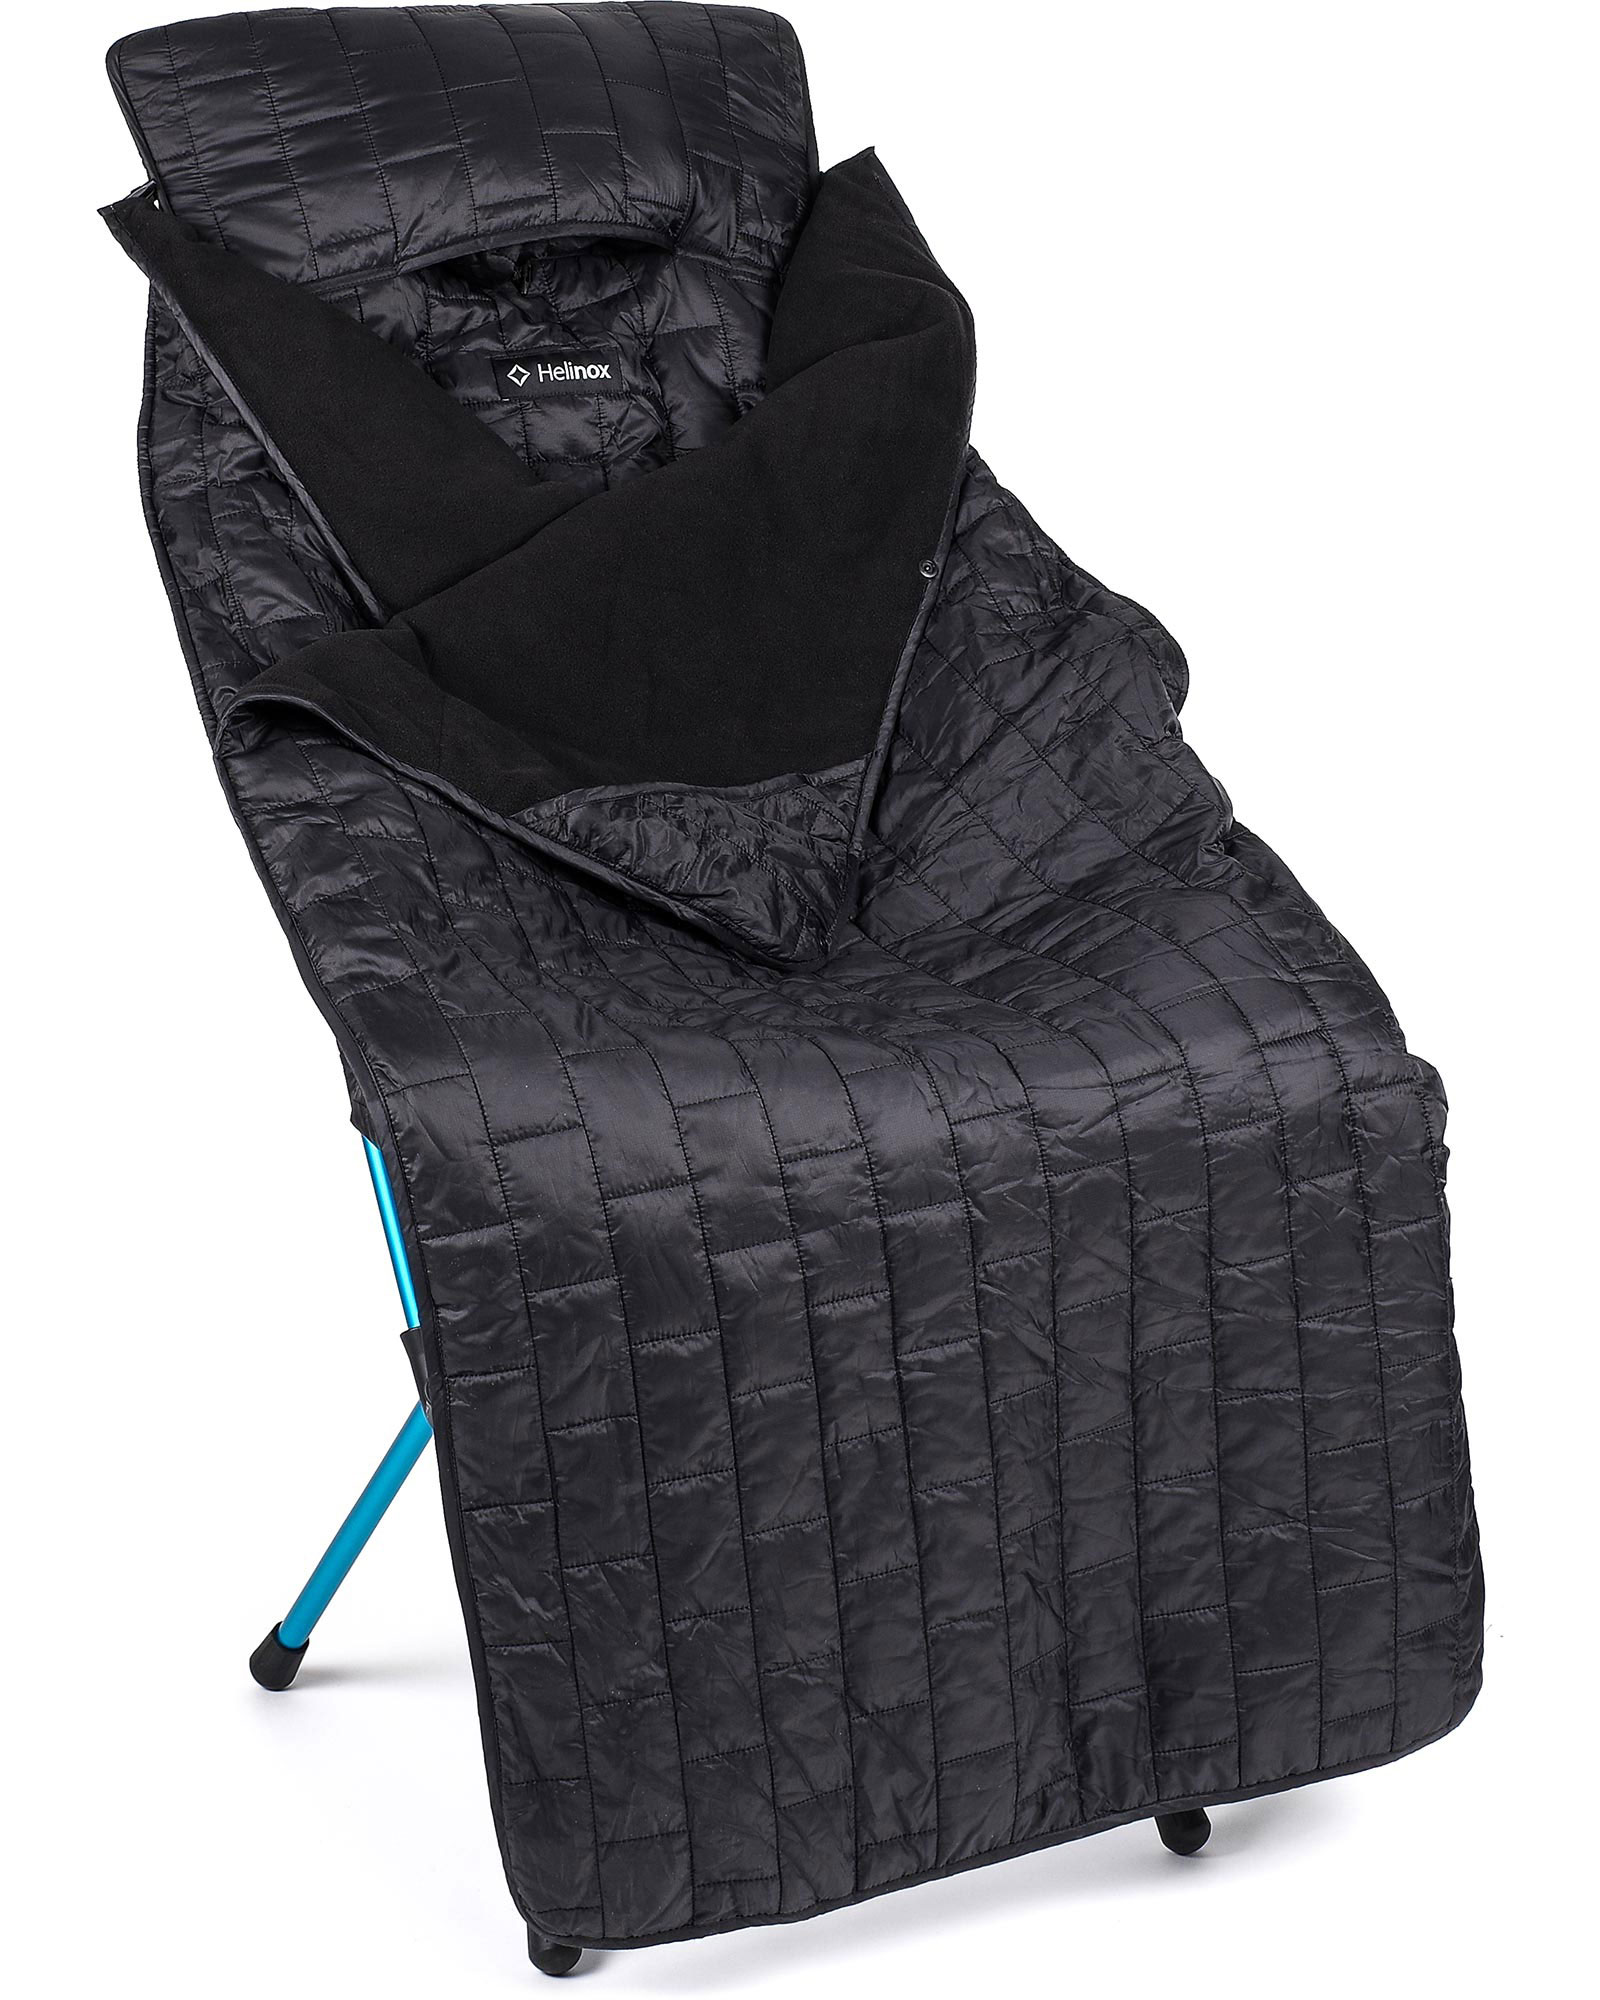 Helinox Toasty For Sunset Chair